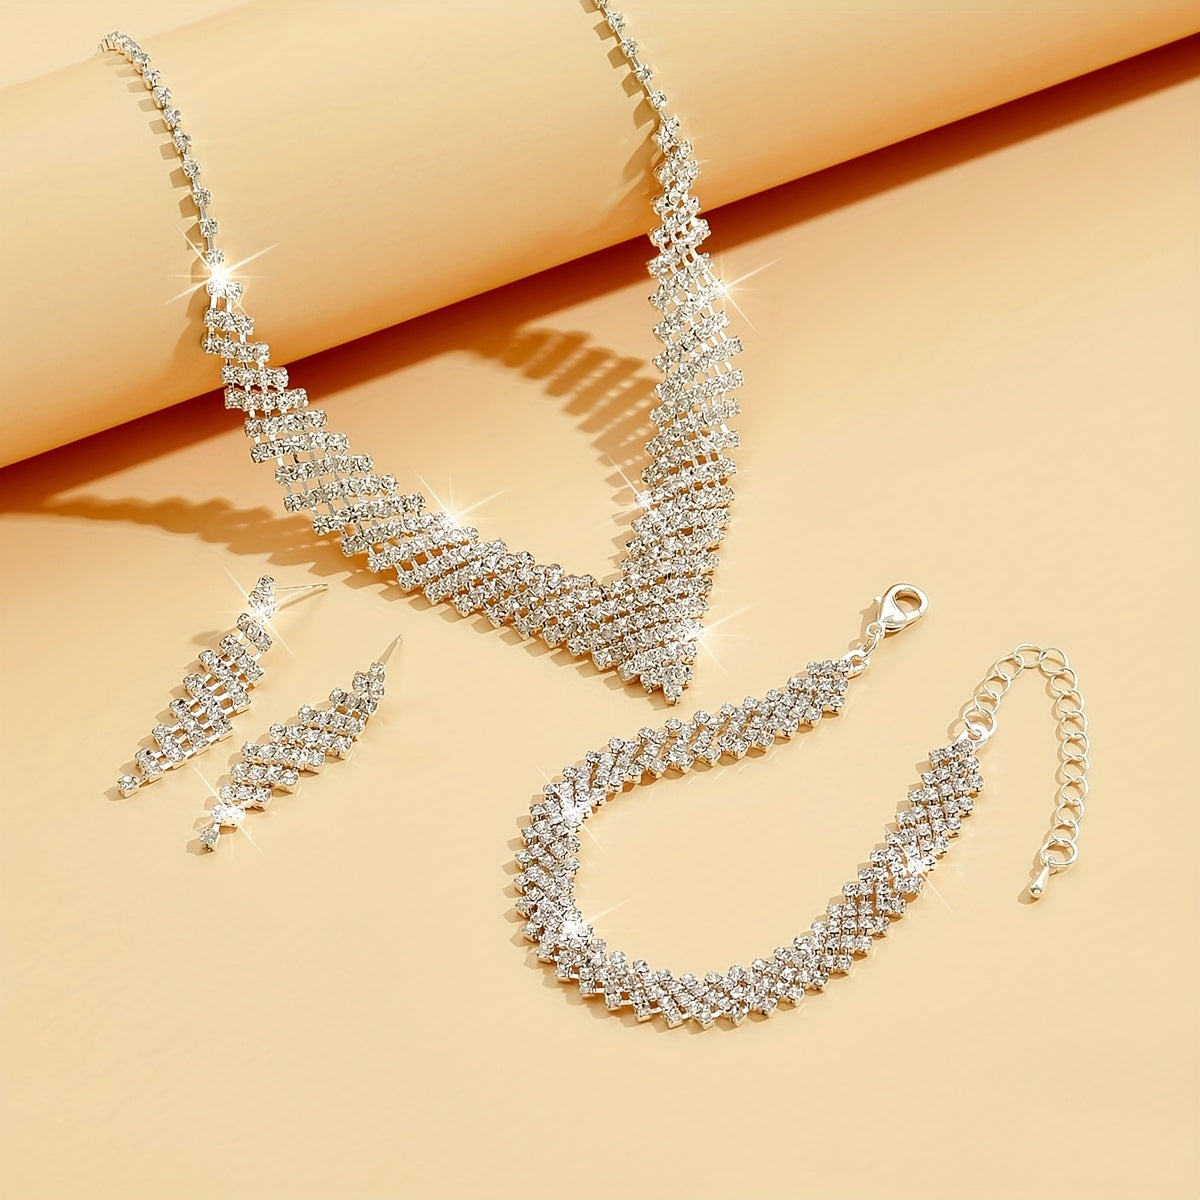 4pcs Elegant Silver Plated Jewelry Set with Rhinestone Inlay for Evening and Cocktail Parties